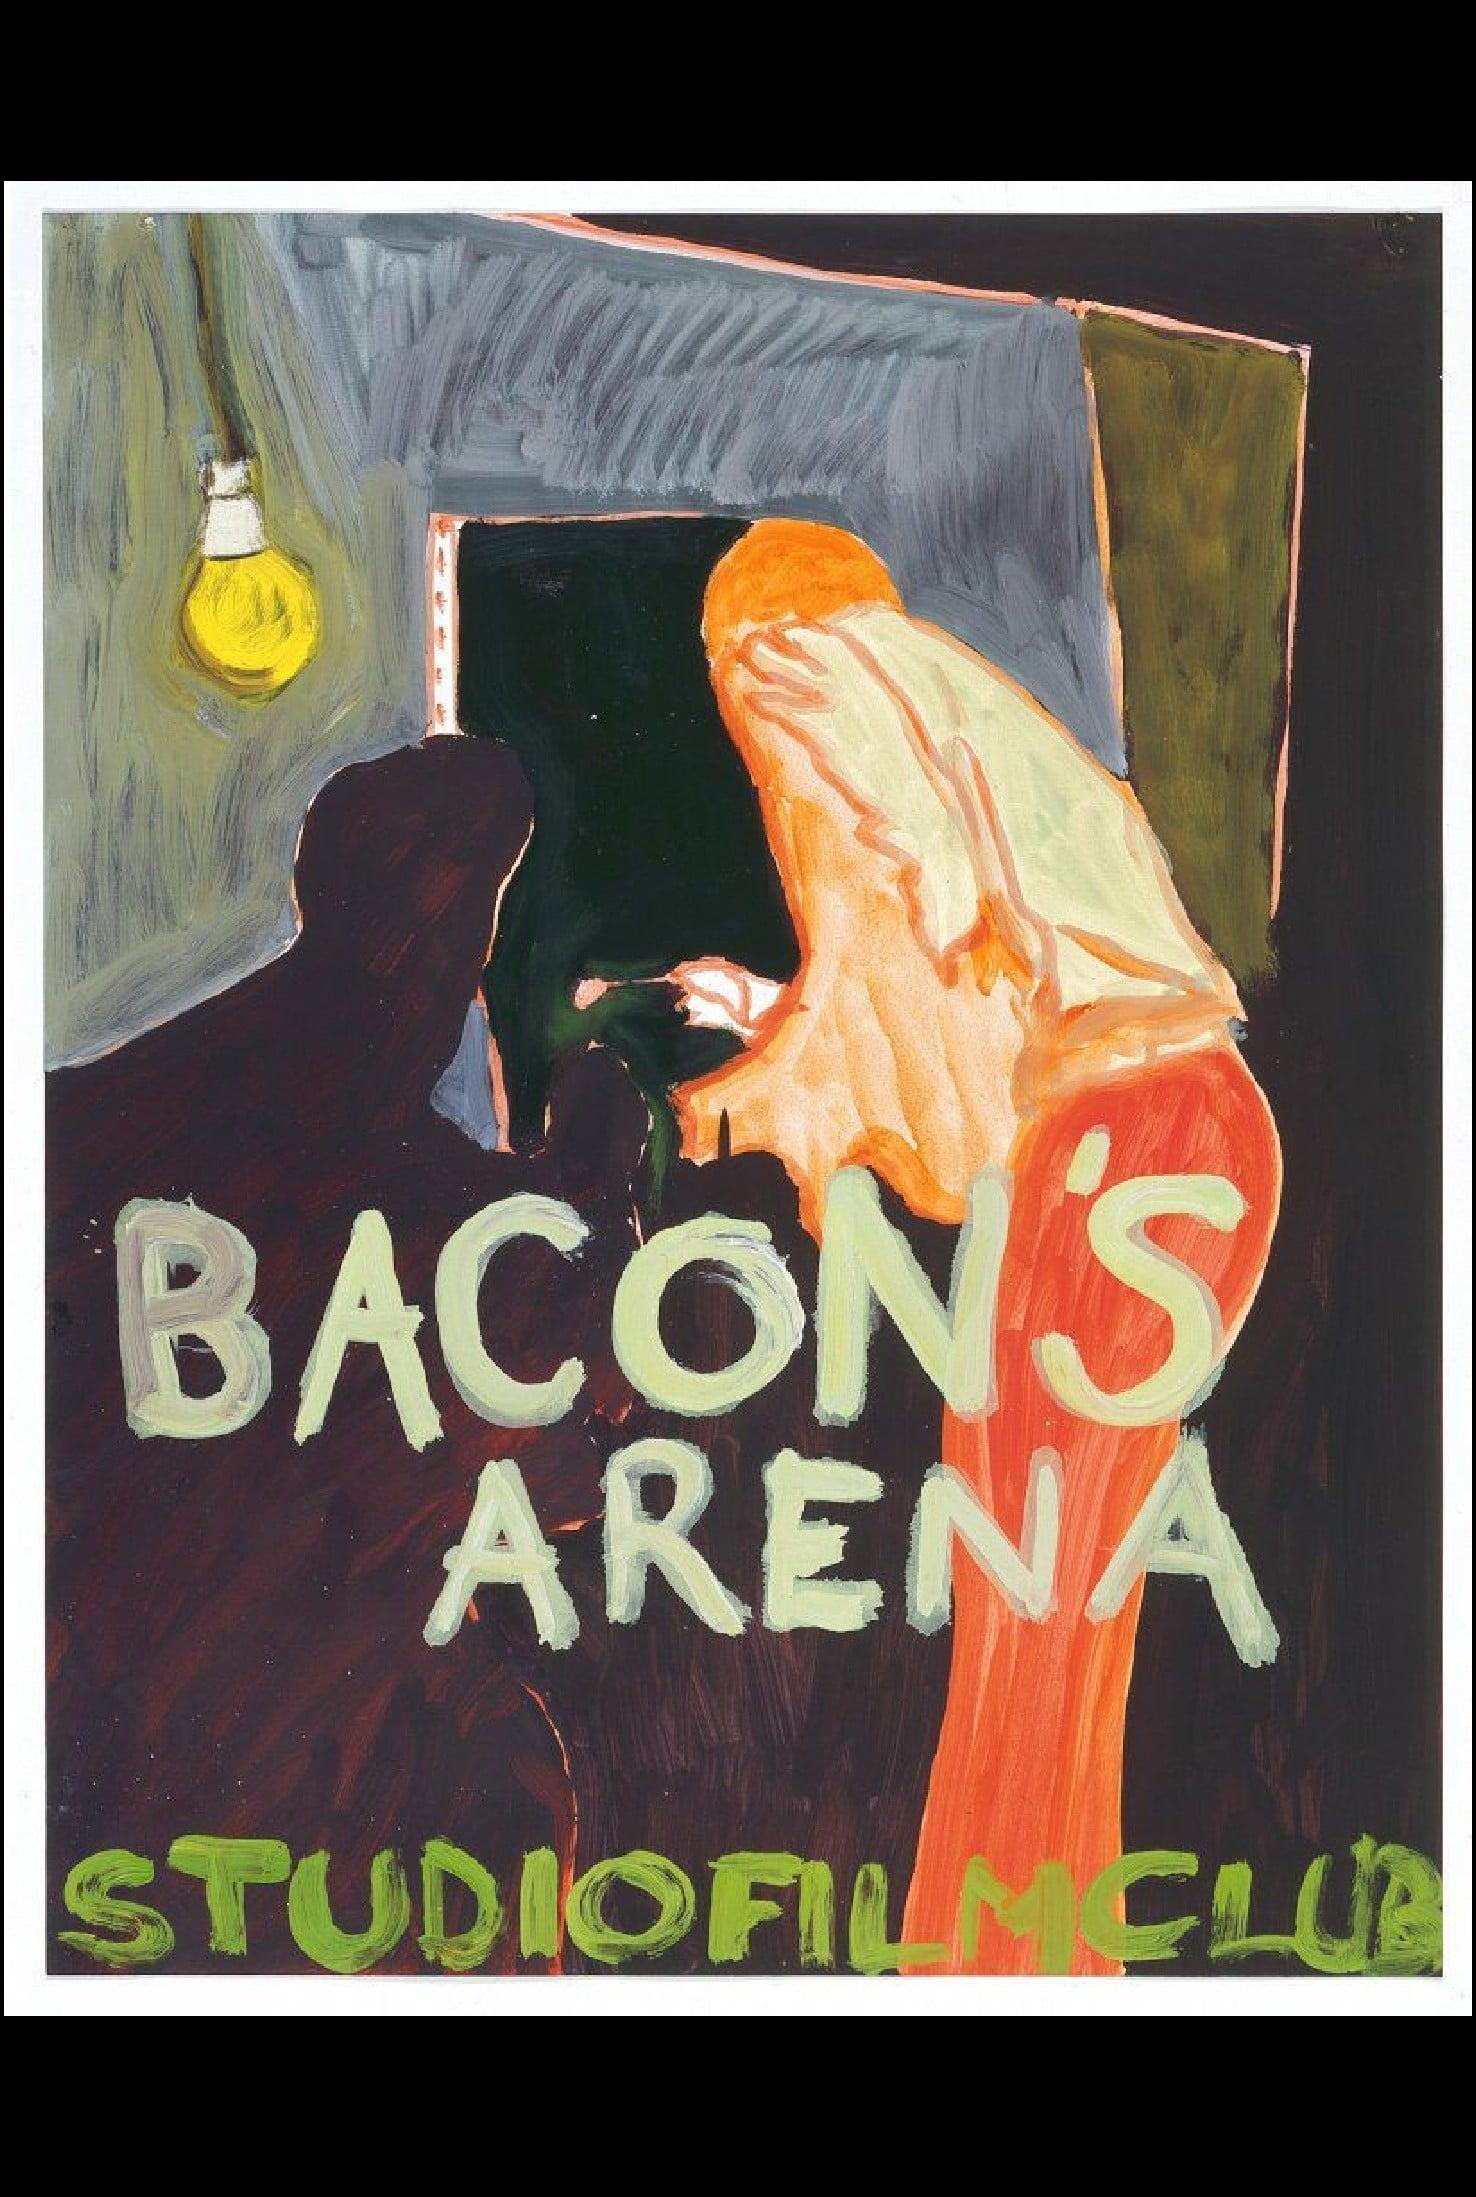 Bacon's Arena poster